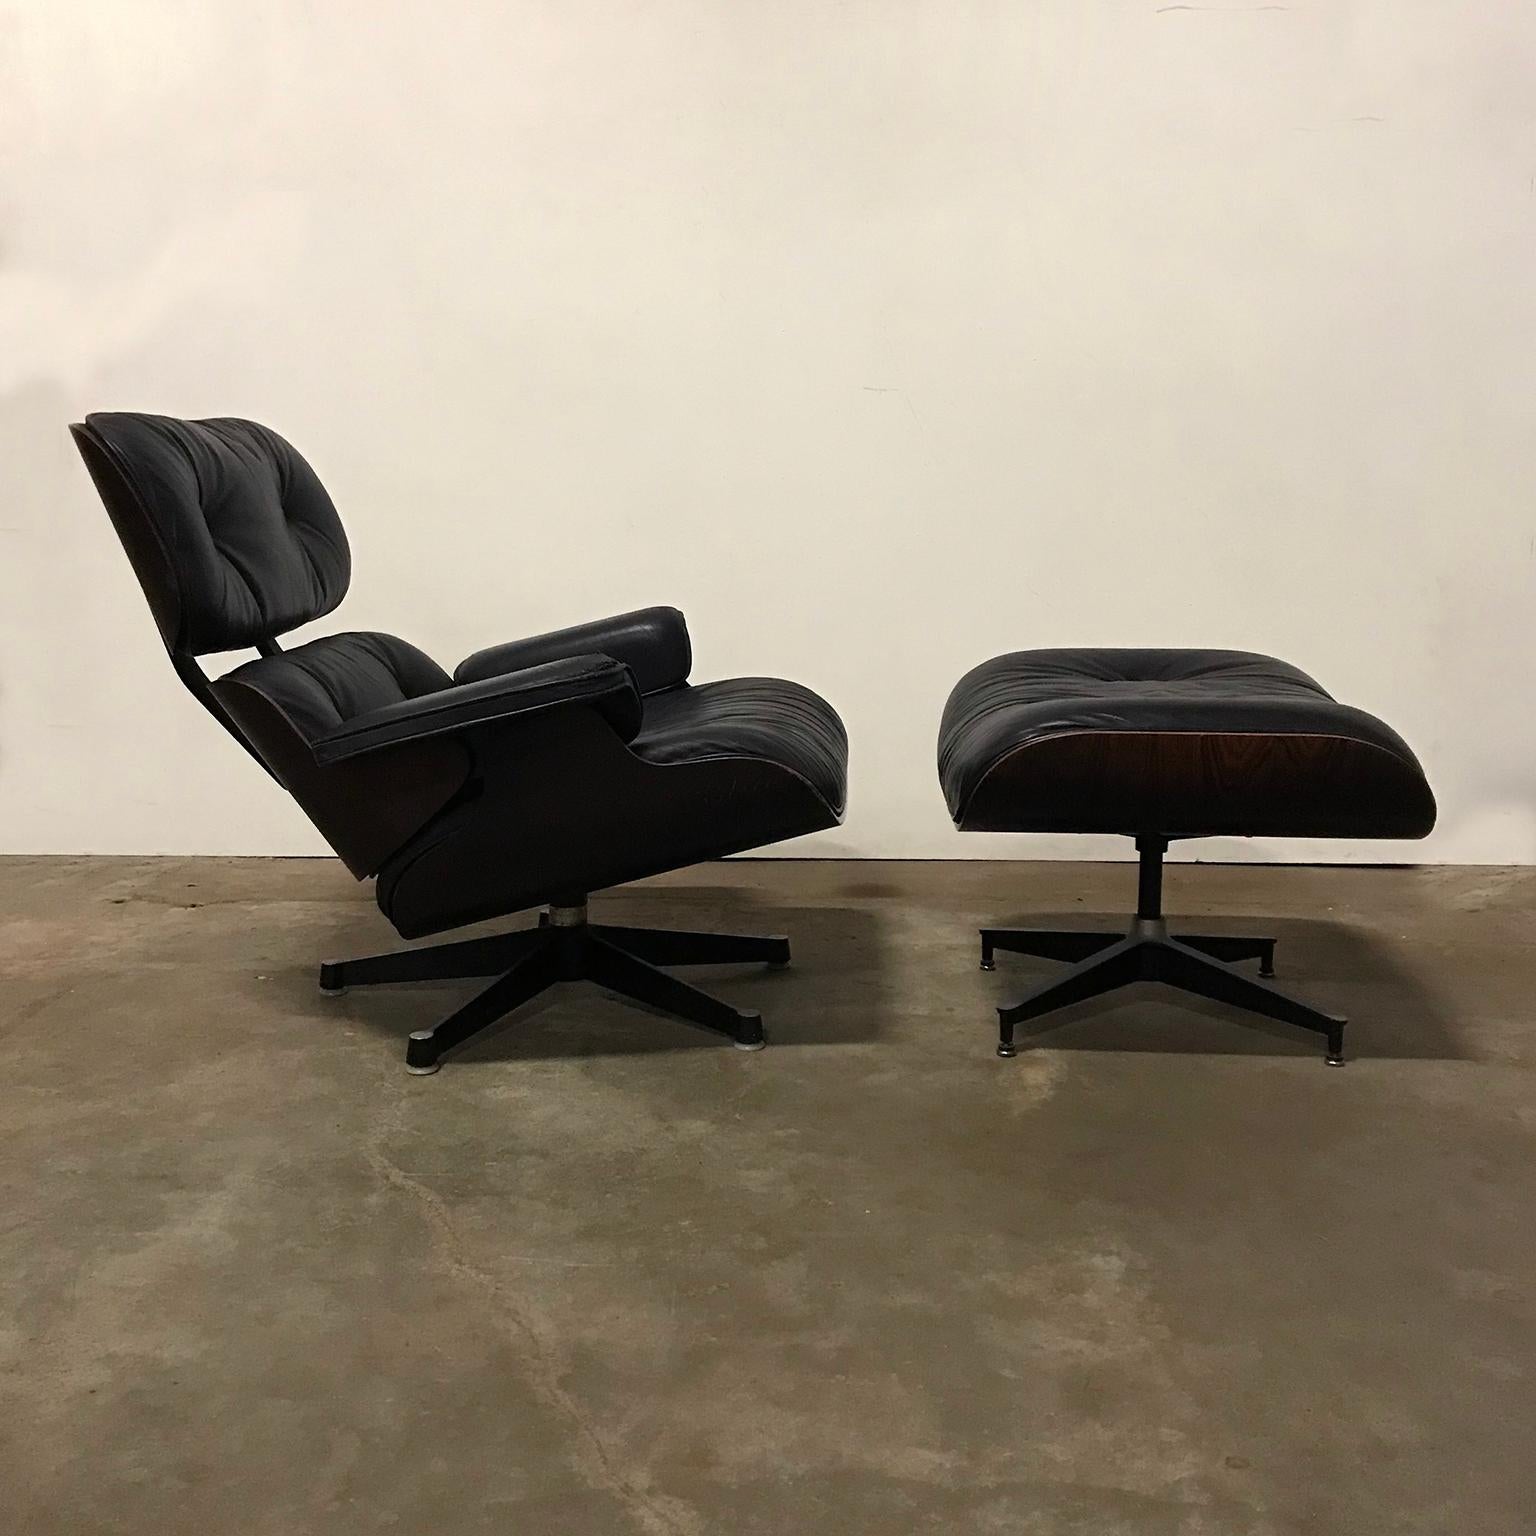 1956, Ray & Charles Eames Lounge Chair, Rare First Edition 1956 in Black Leather For Sale 10